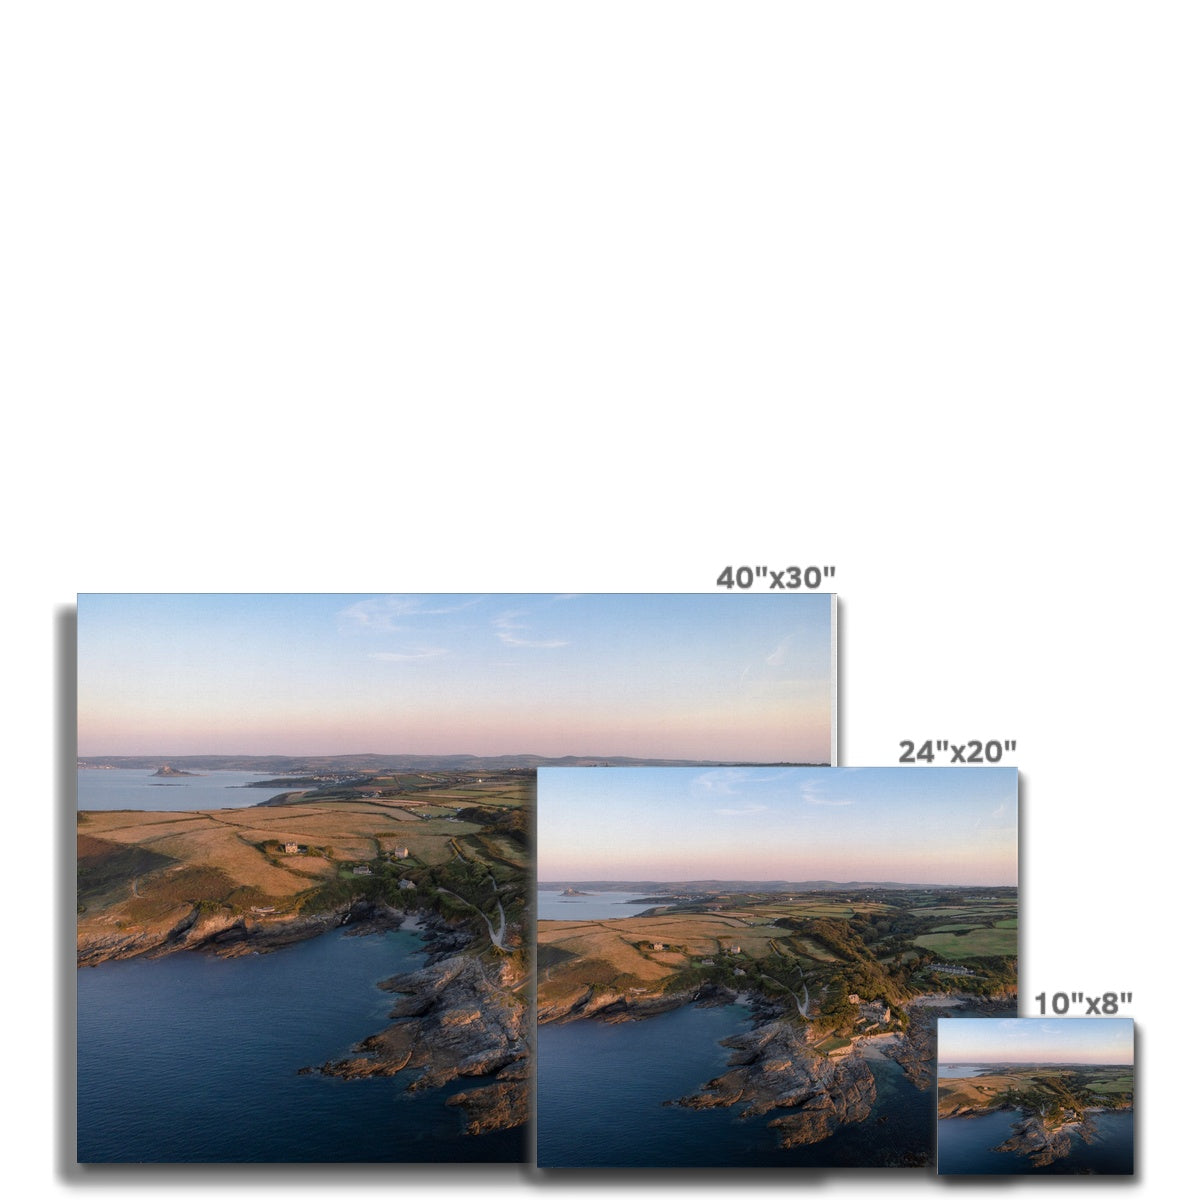 bessys prussia cove canvas sizes